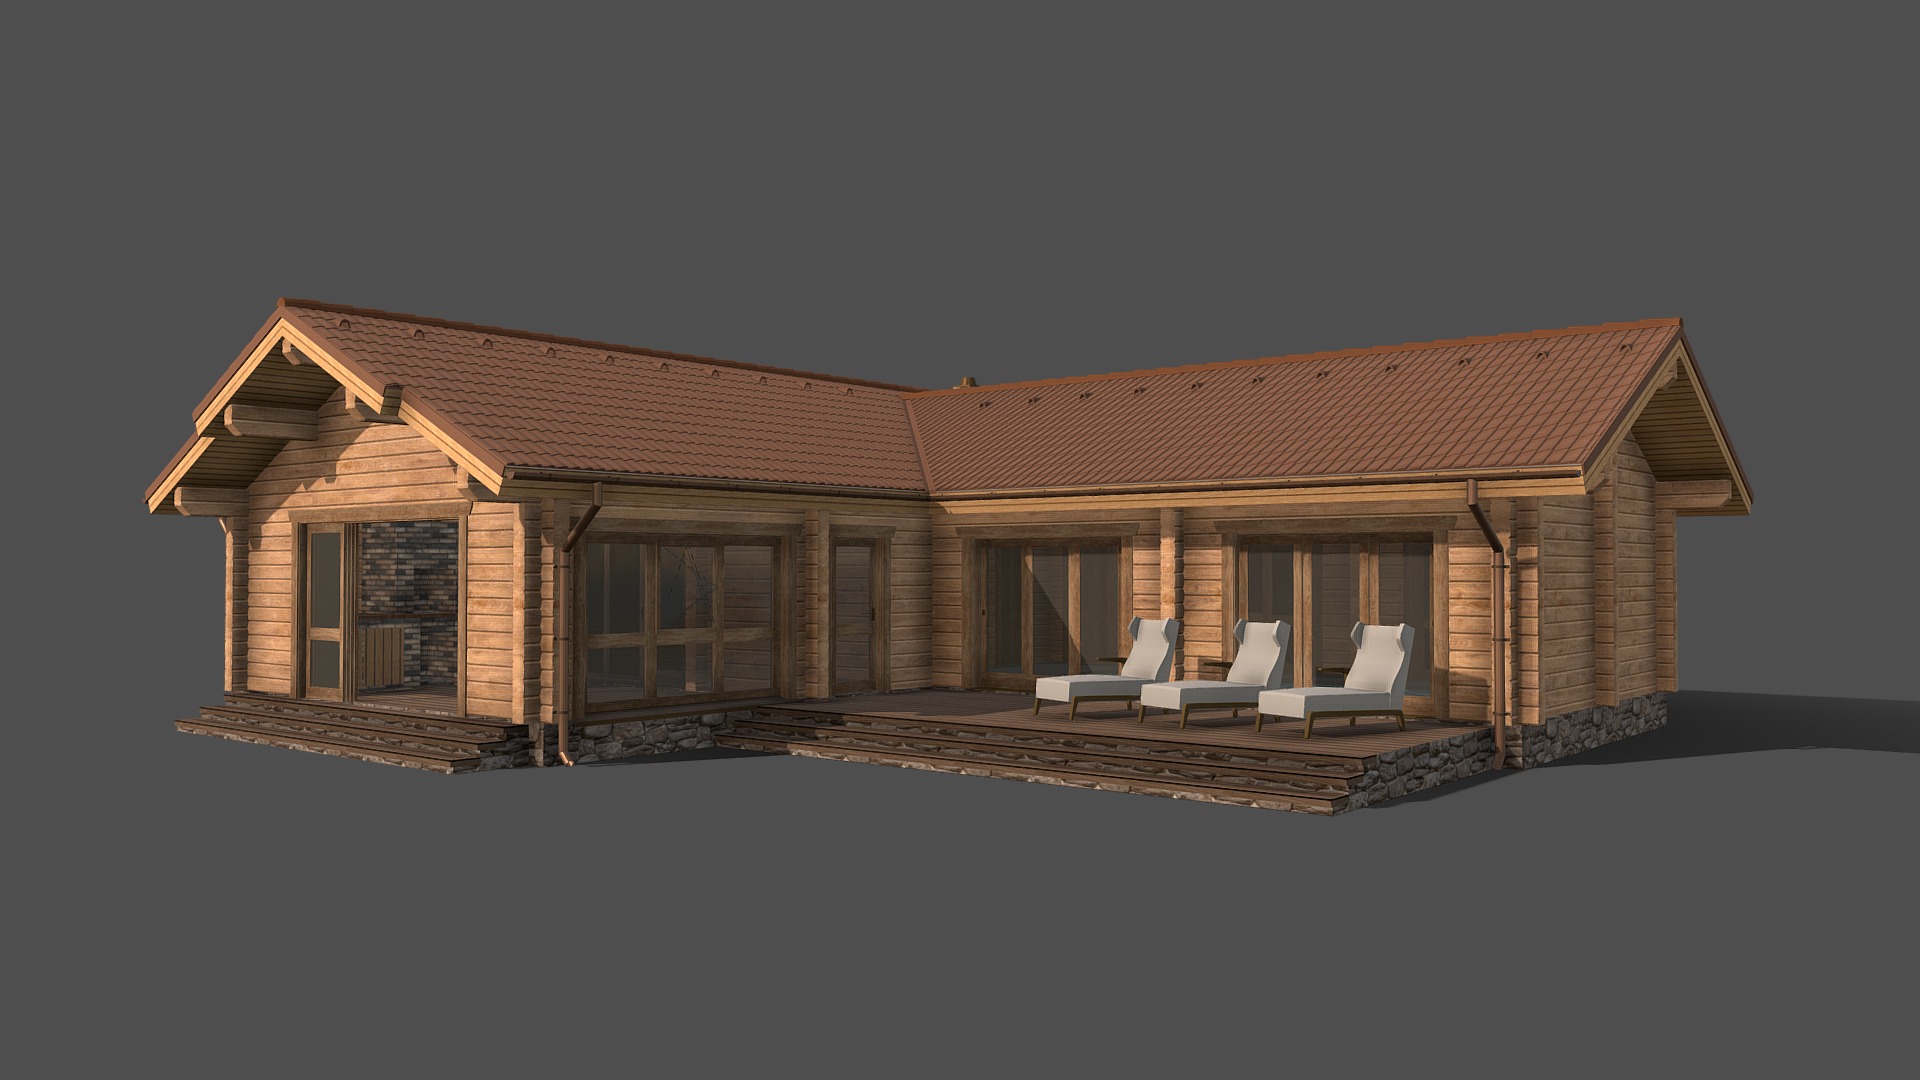 3D model Проект бани_2.0 - This is a 3D model of the Проект бани_2.0. The 3D model is about a house with a patio and chairs.